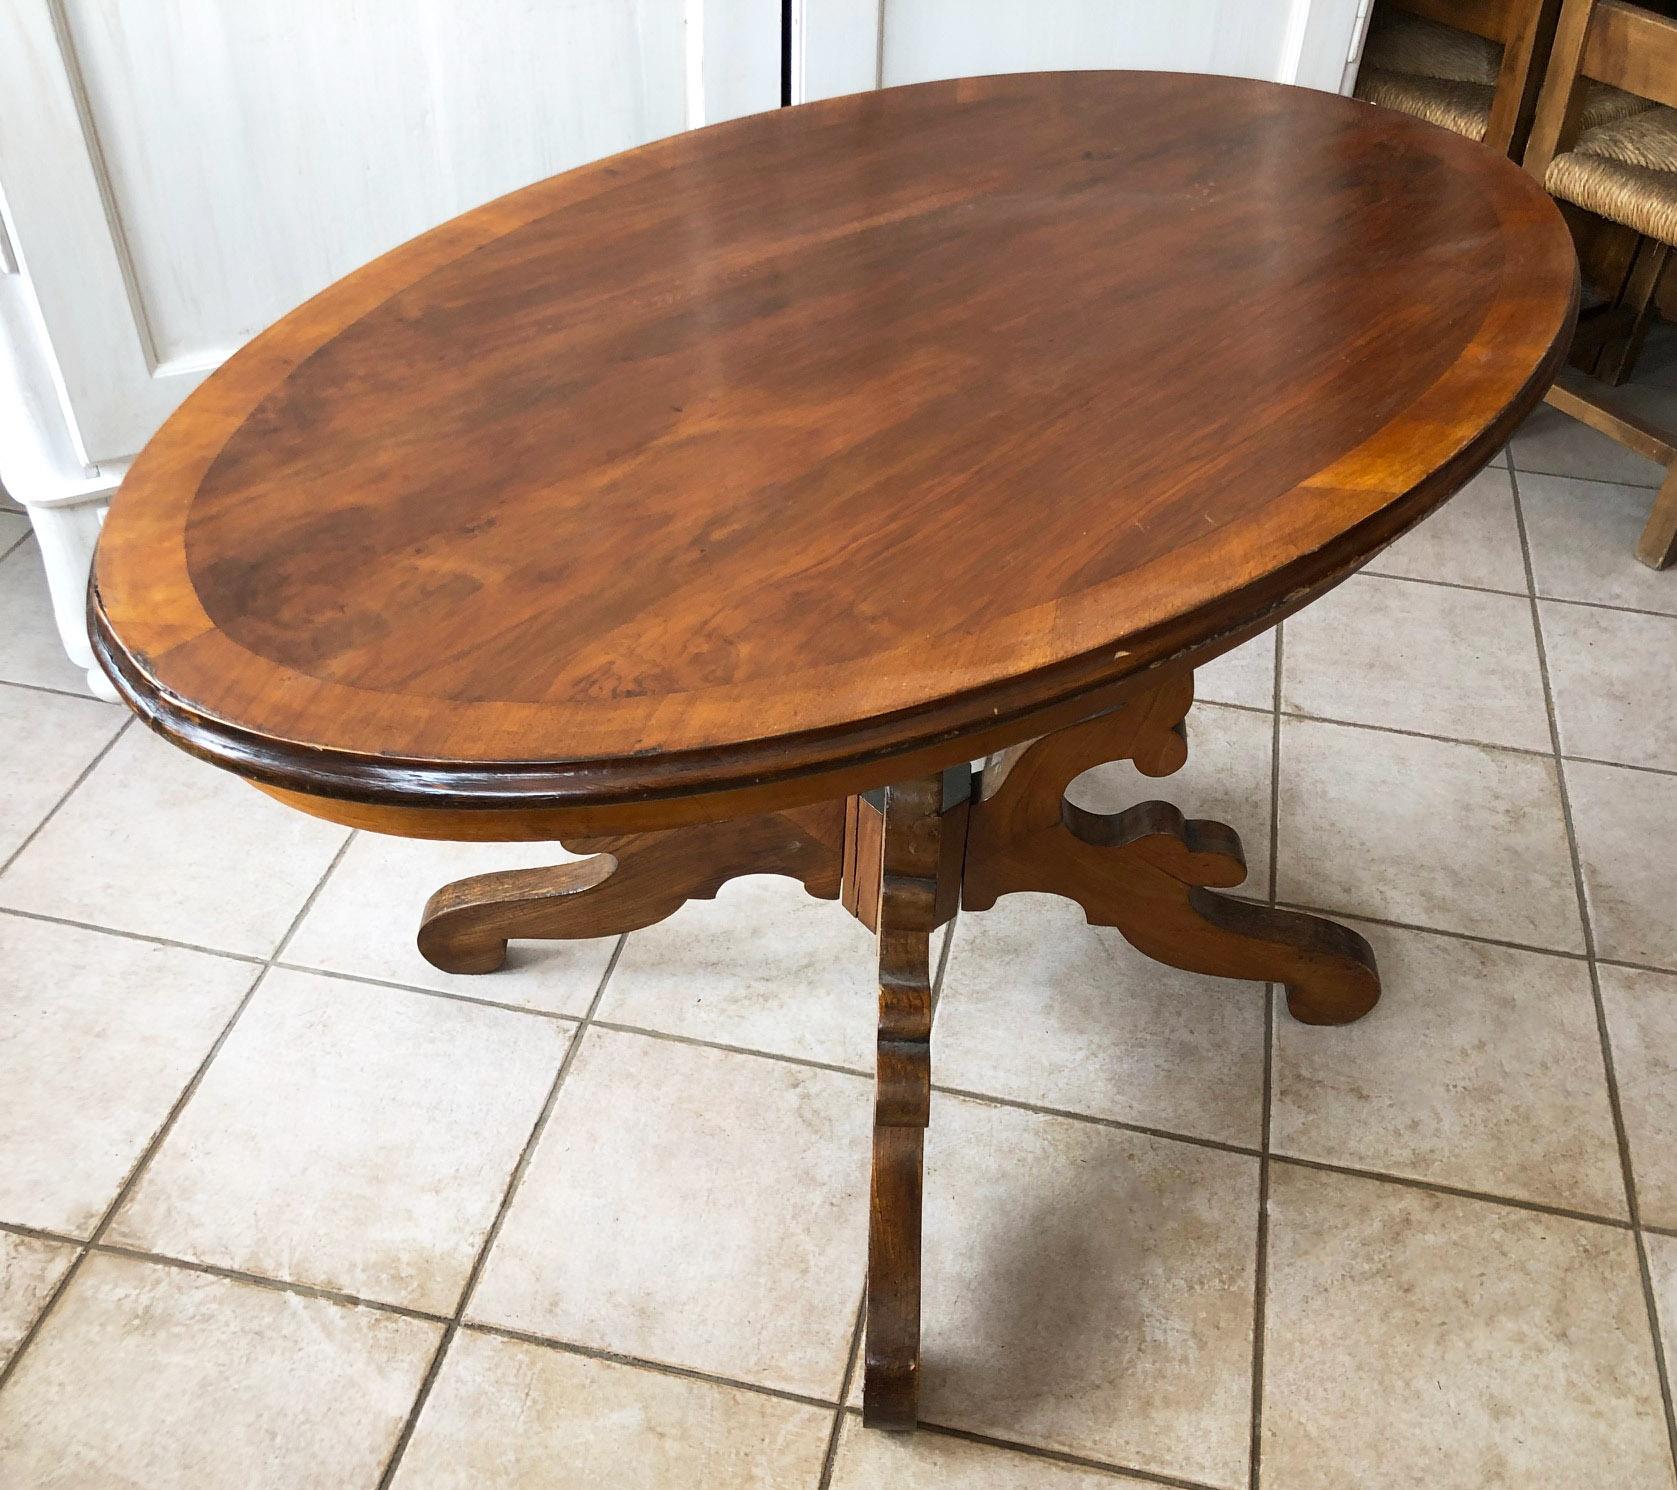 Oval table in walnut, from 1900, original Tuscan.
Veneered top, solid wood legs.
 
To find out the cost of transport to USA etc write a message indicating the delivery city.